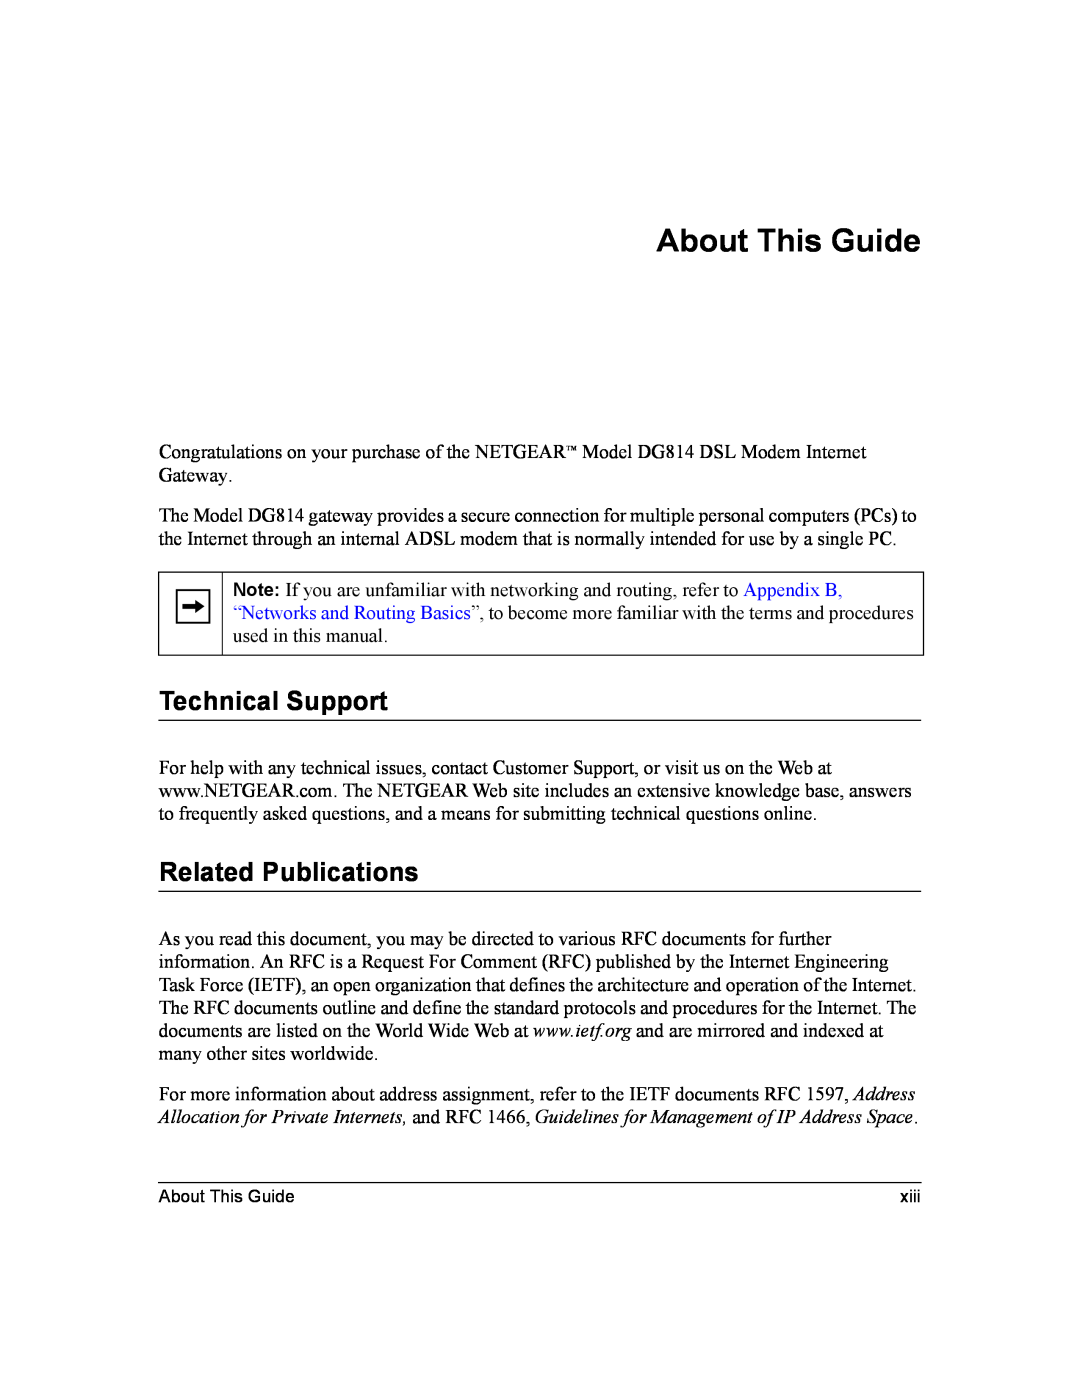 NETGEAR DG814 DSL manual About This Guide, Technical Support, Related Publications 